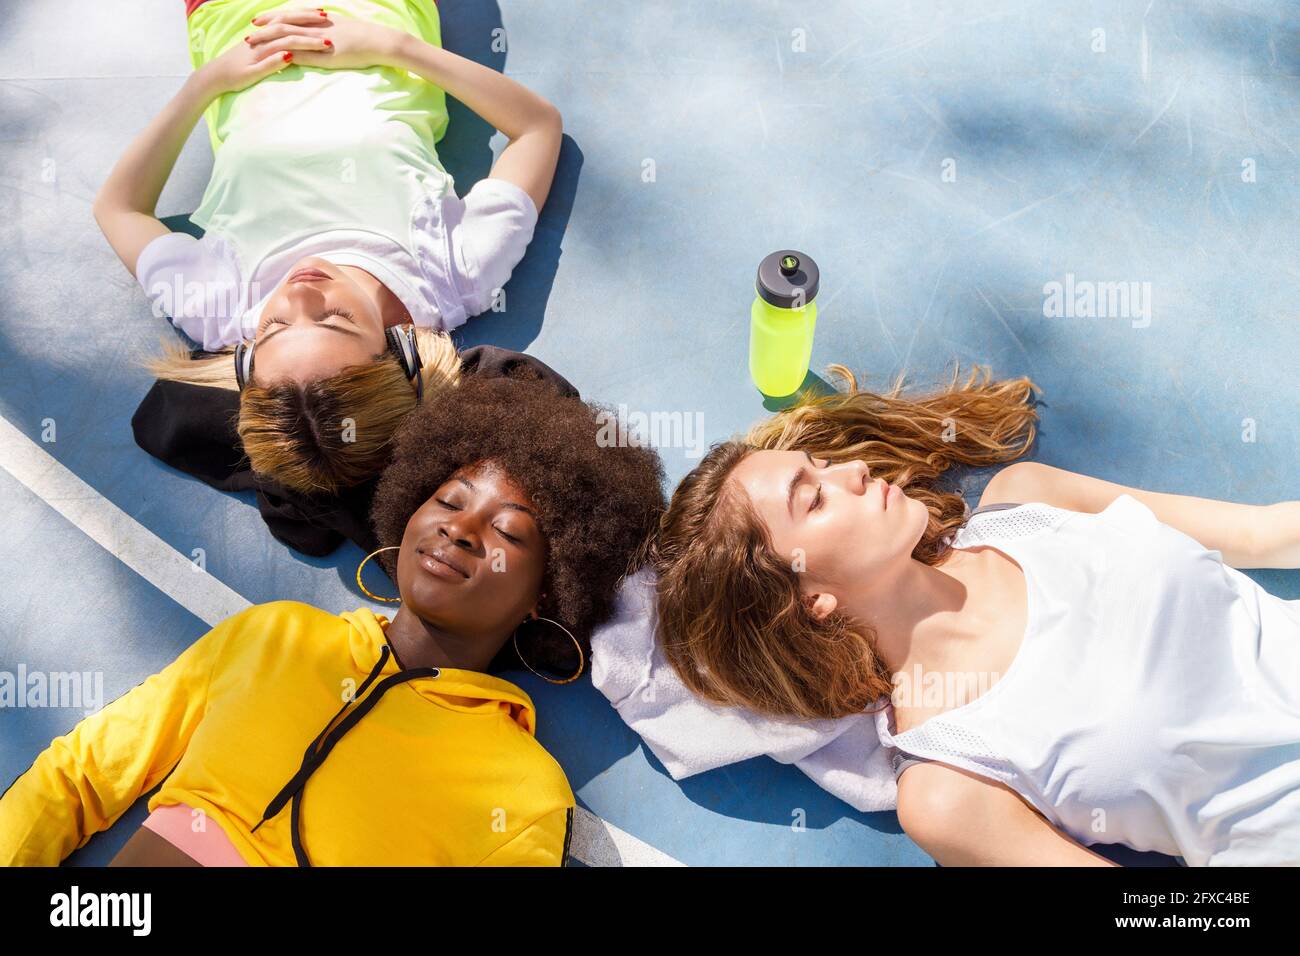 Female friends lying together on sports court floor Stock Photo